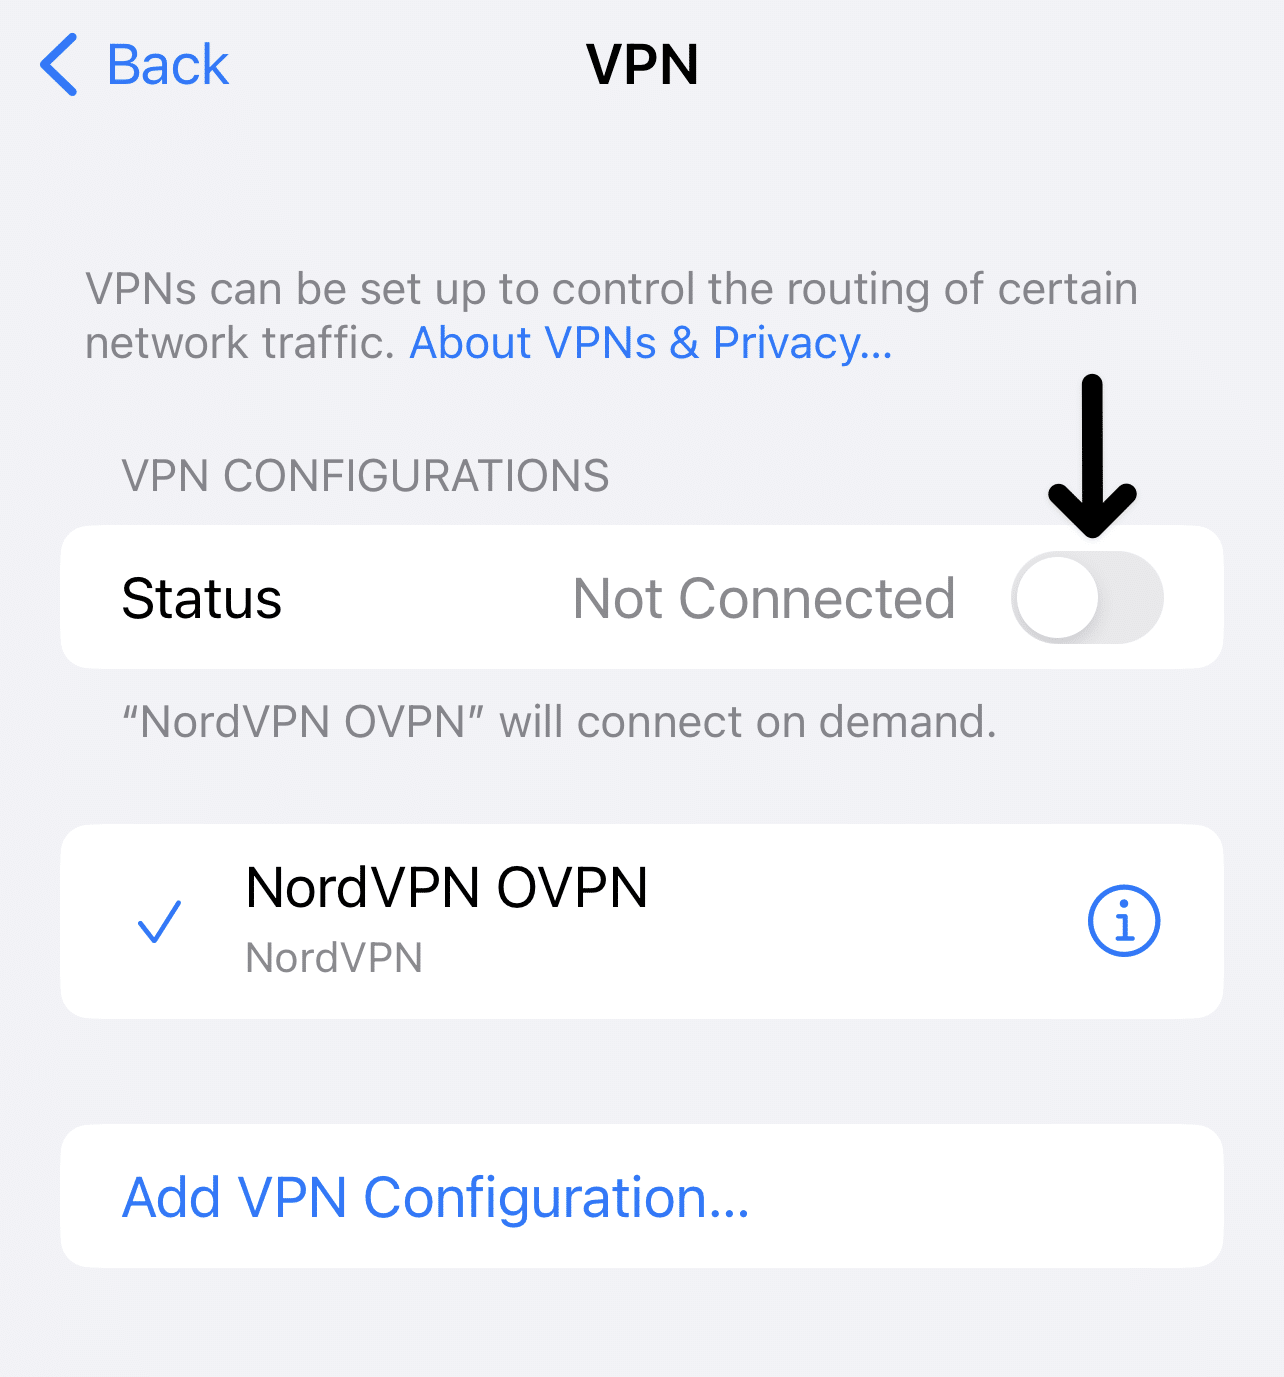 Disable VPN or Proxy connection on iPhone or iOS through the system settings to fix PayPal not sending or receiving SMS verification code